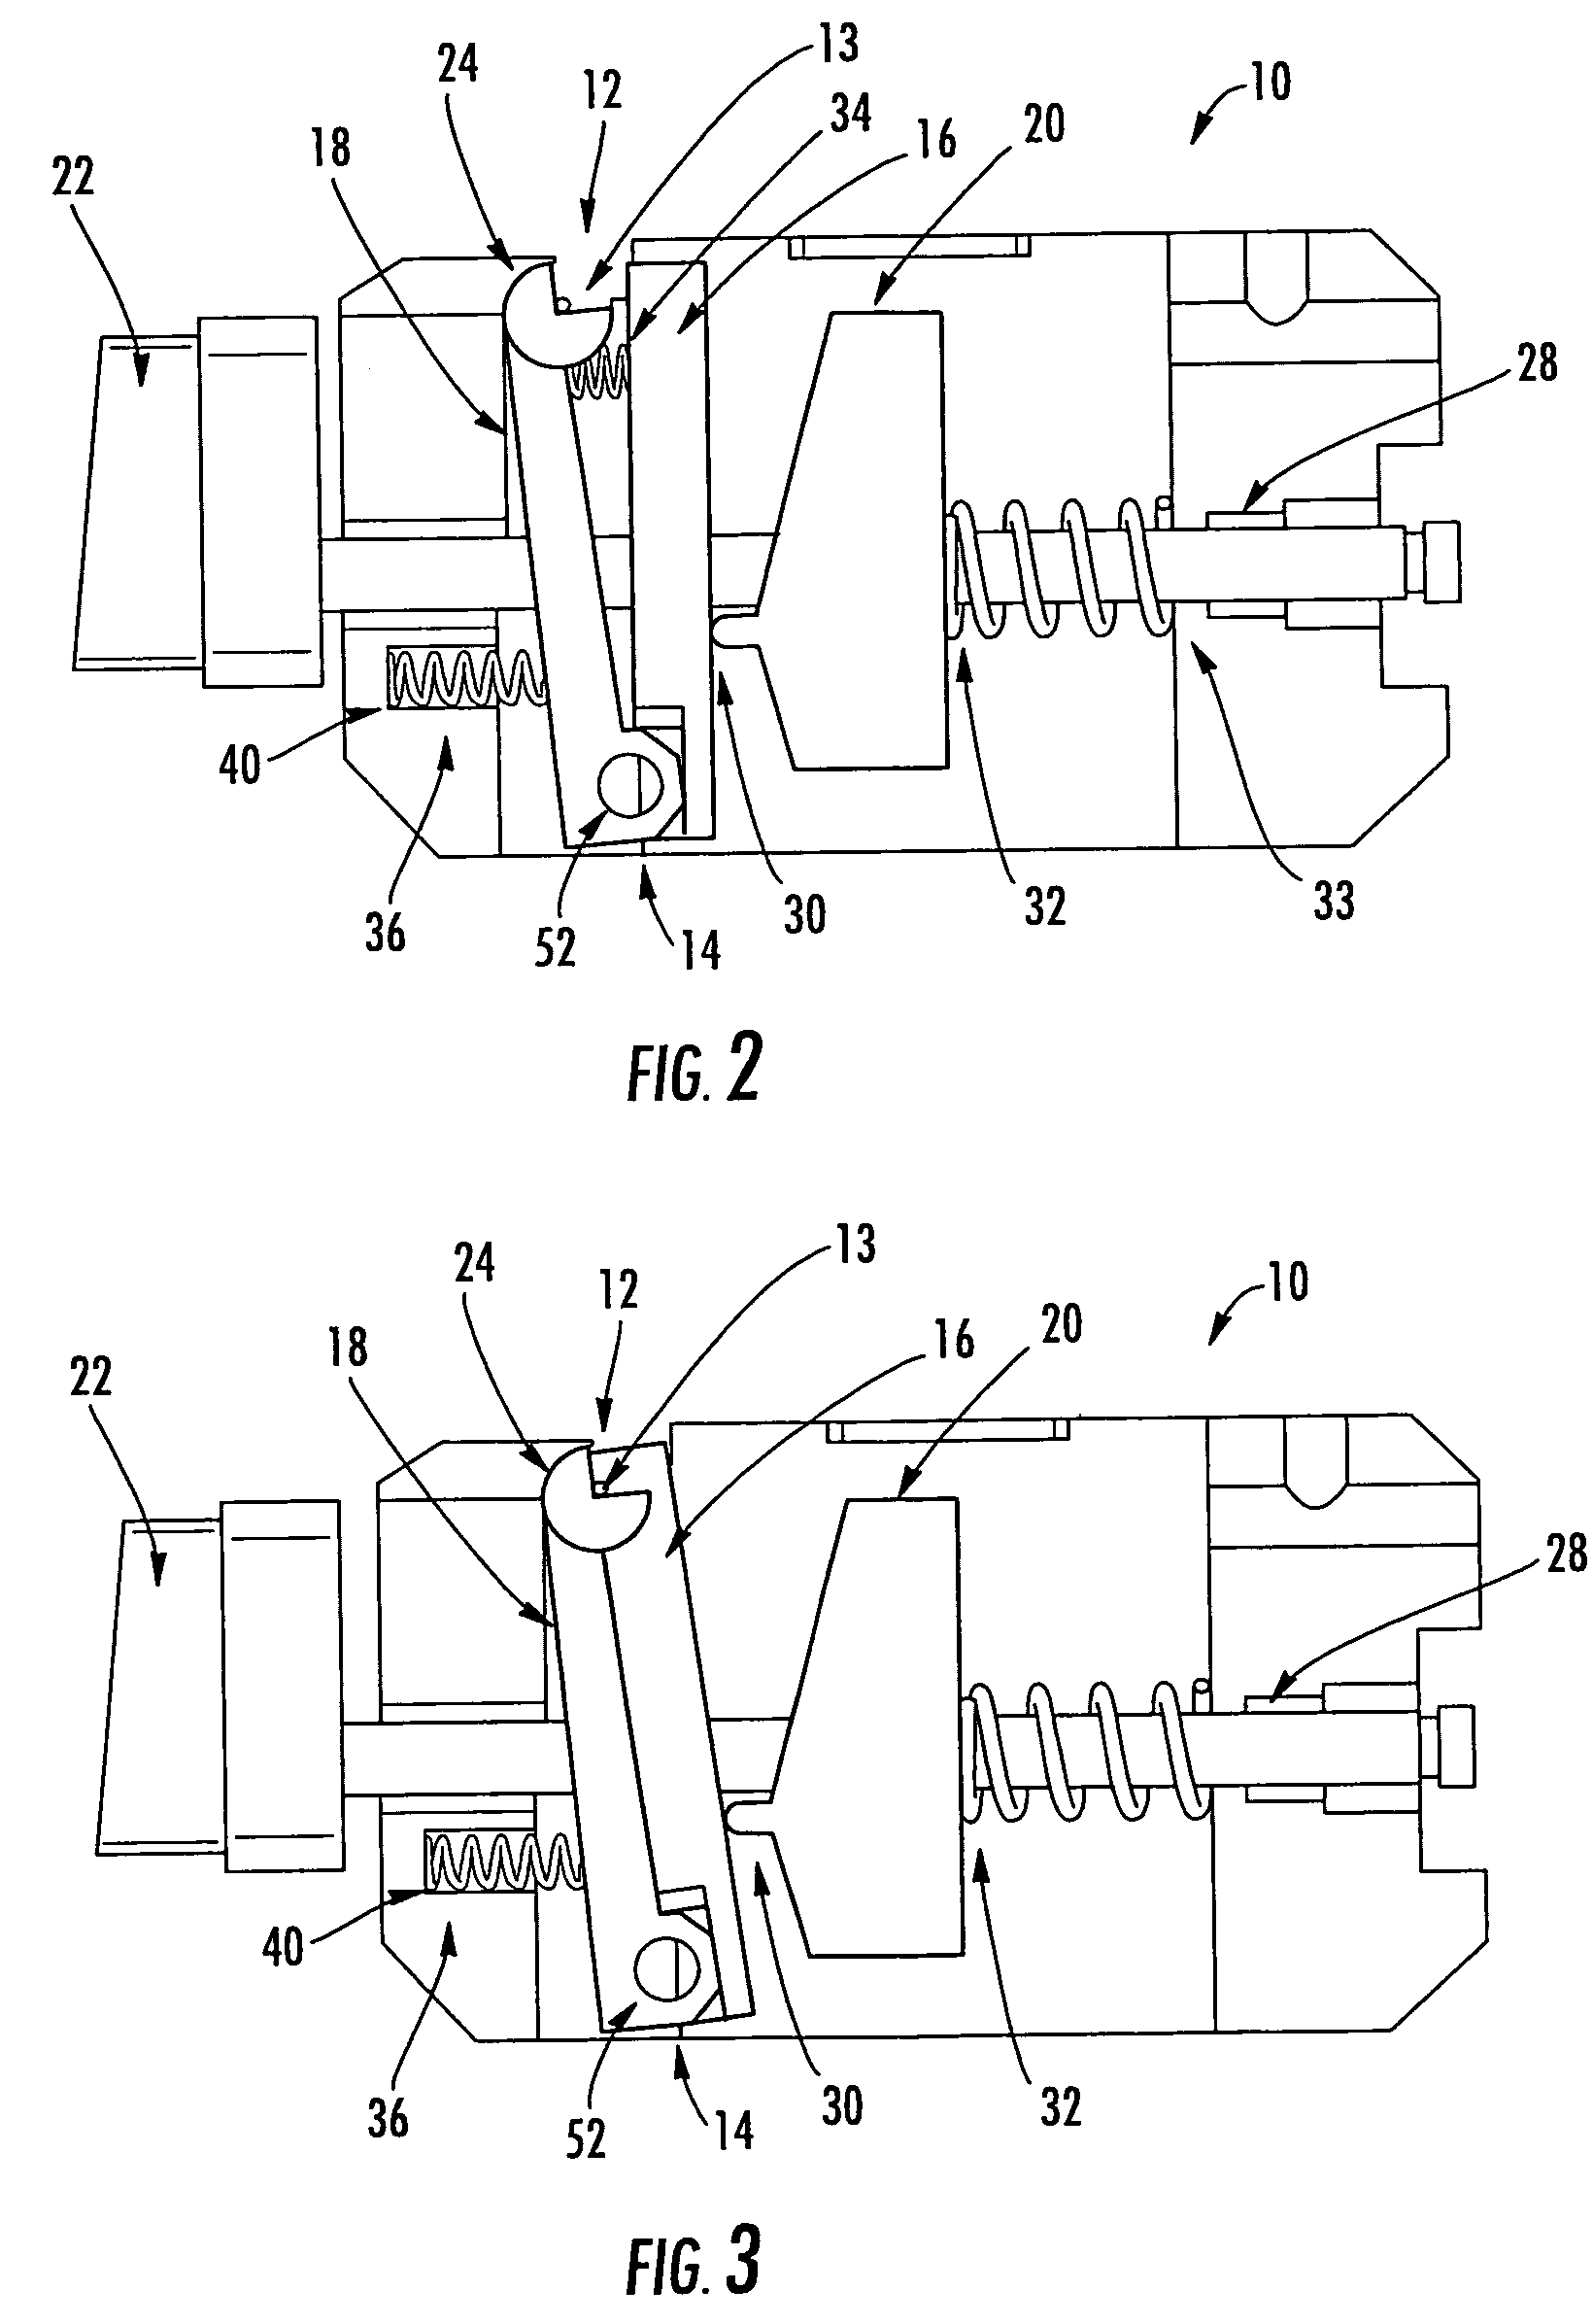 Retention and rotation clamp assembly for use with an angled optical fiber cleaver